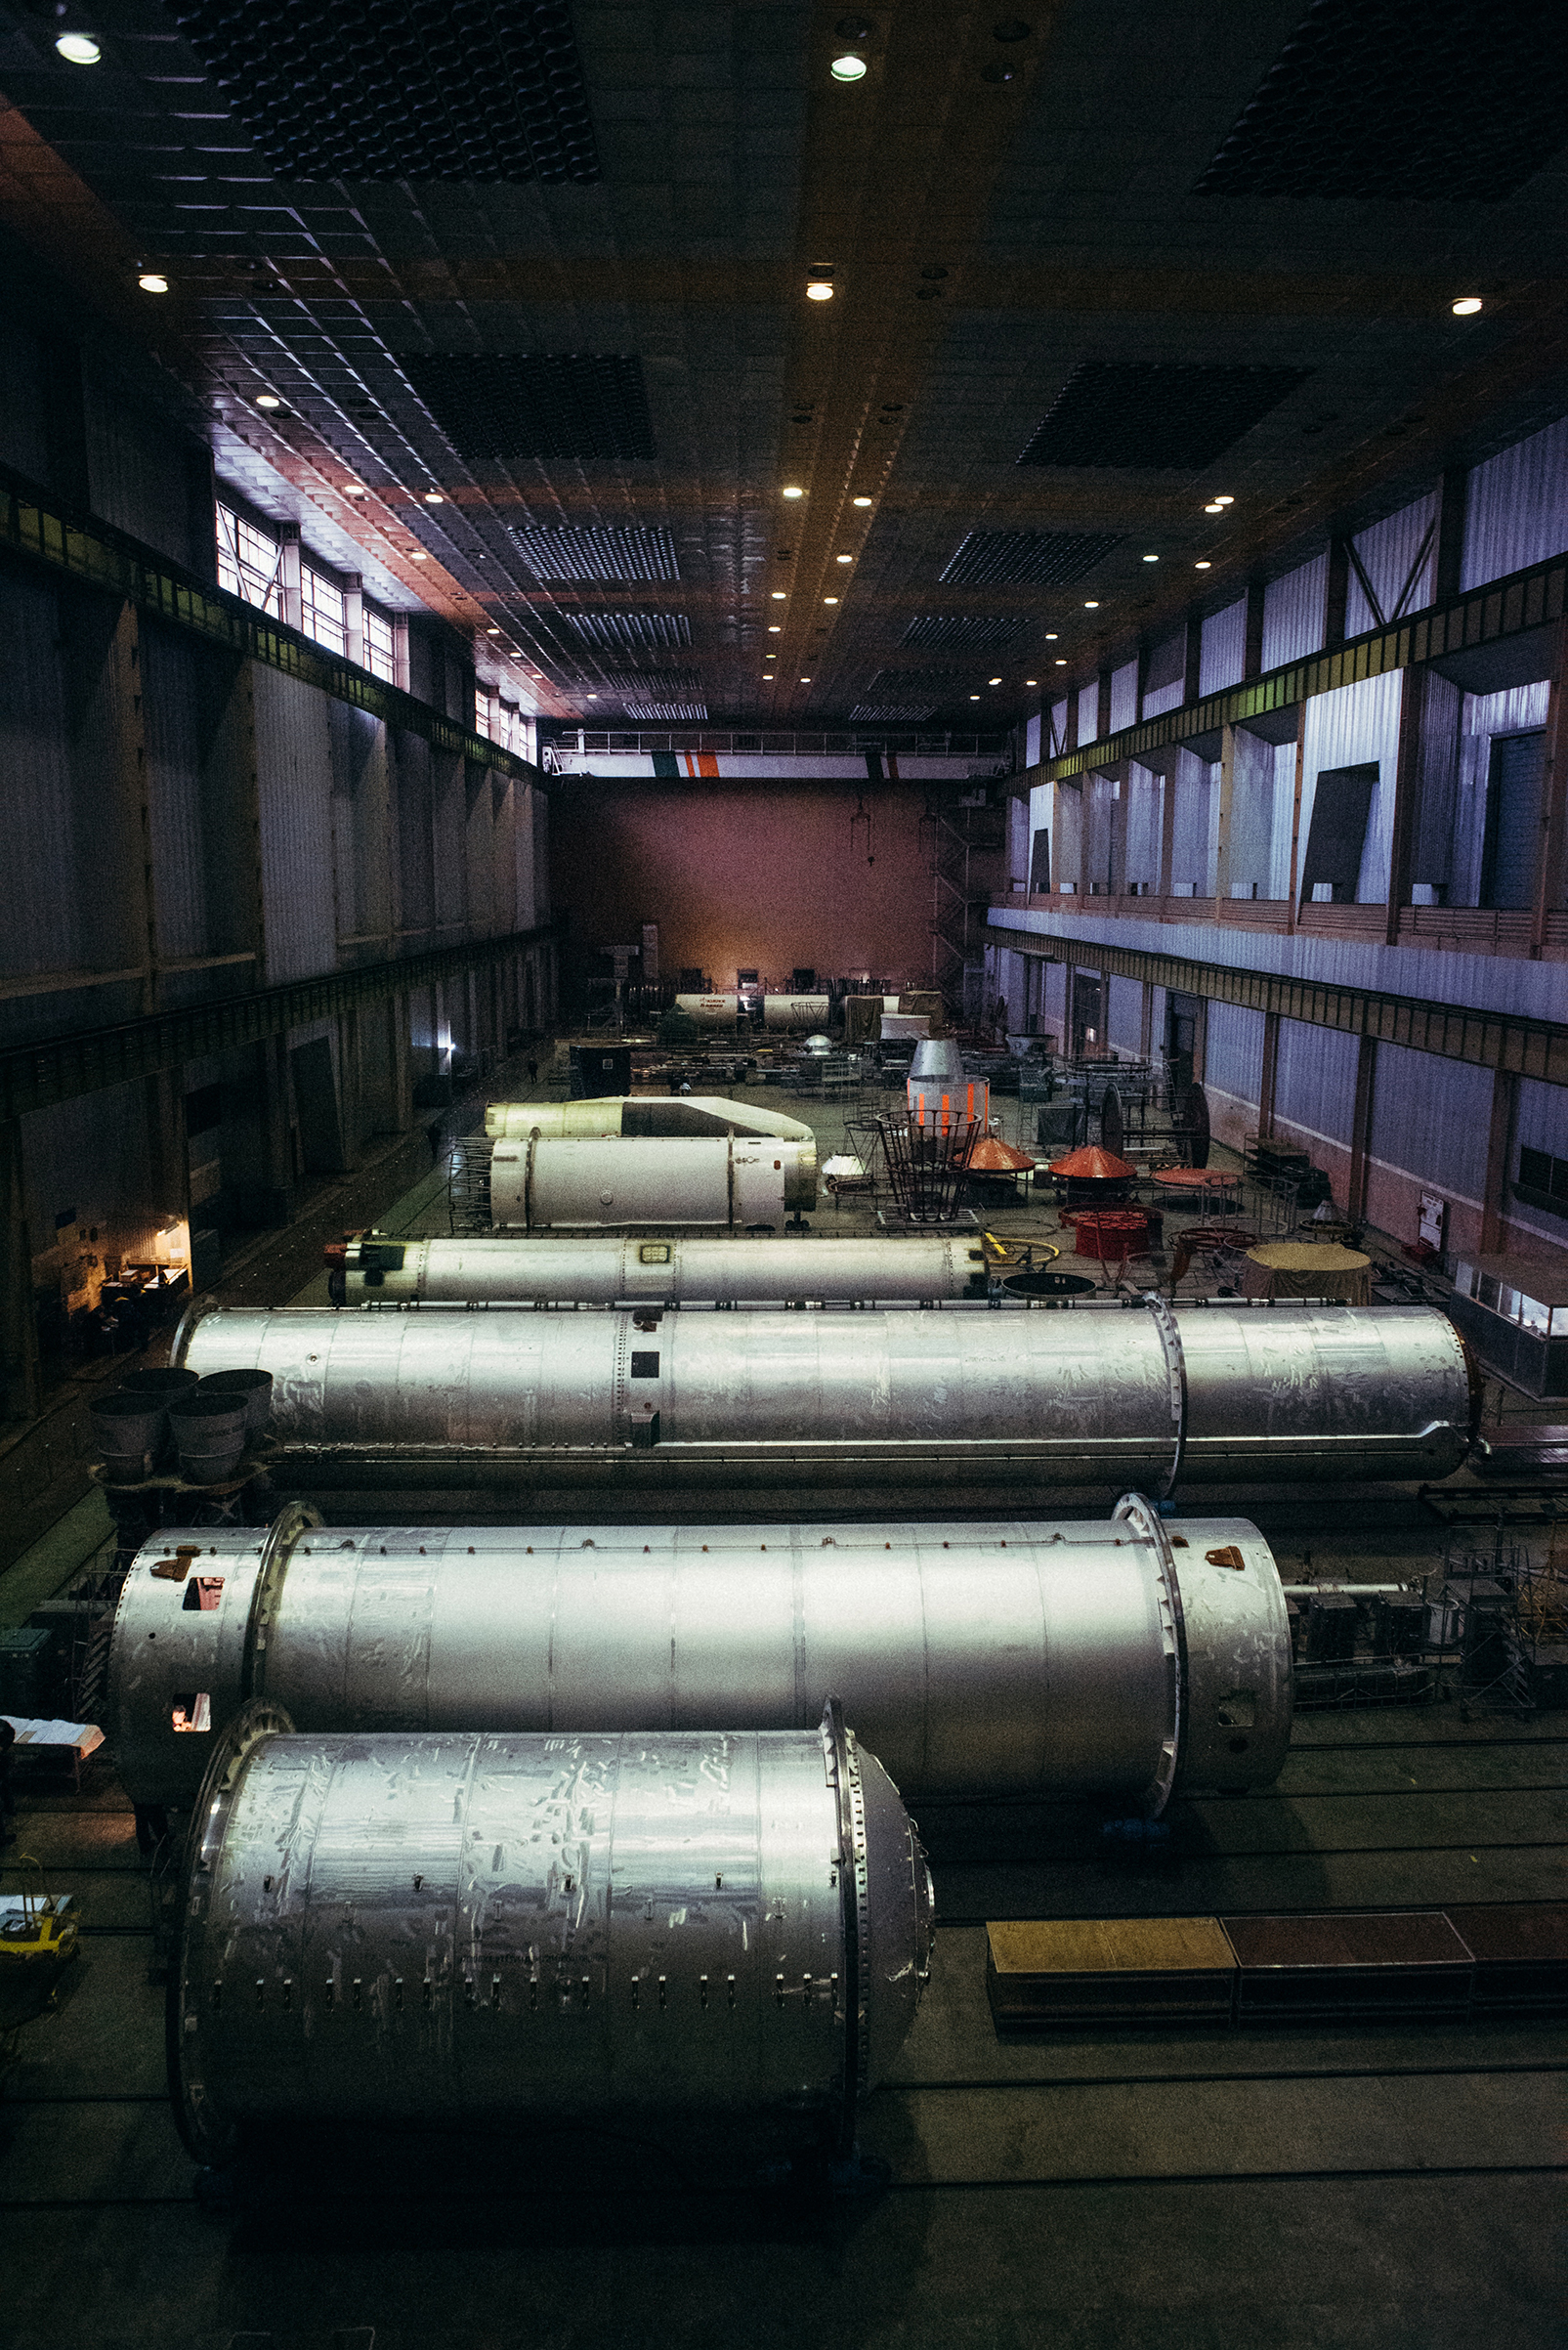 Rocket parts await assembly at Workshop 97 of the Yuzhmash plant (Maxim Dondyuk for TIME)